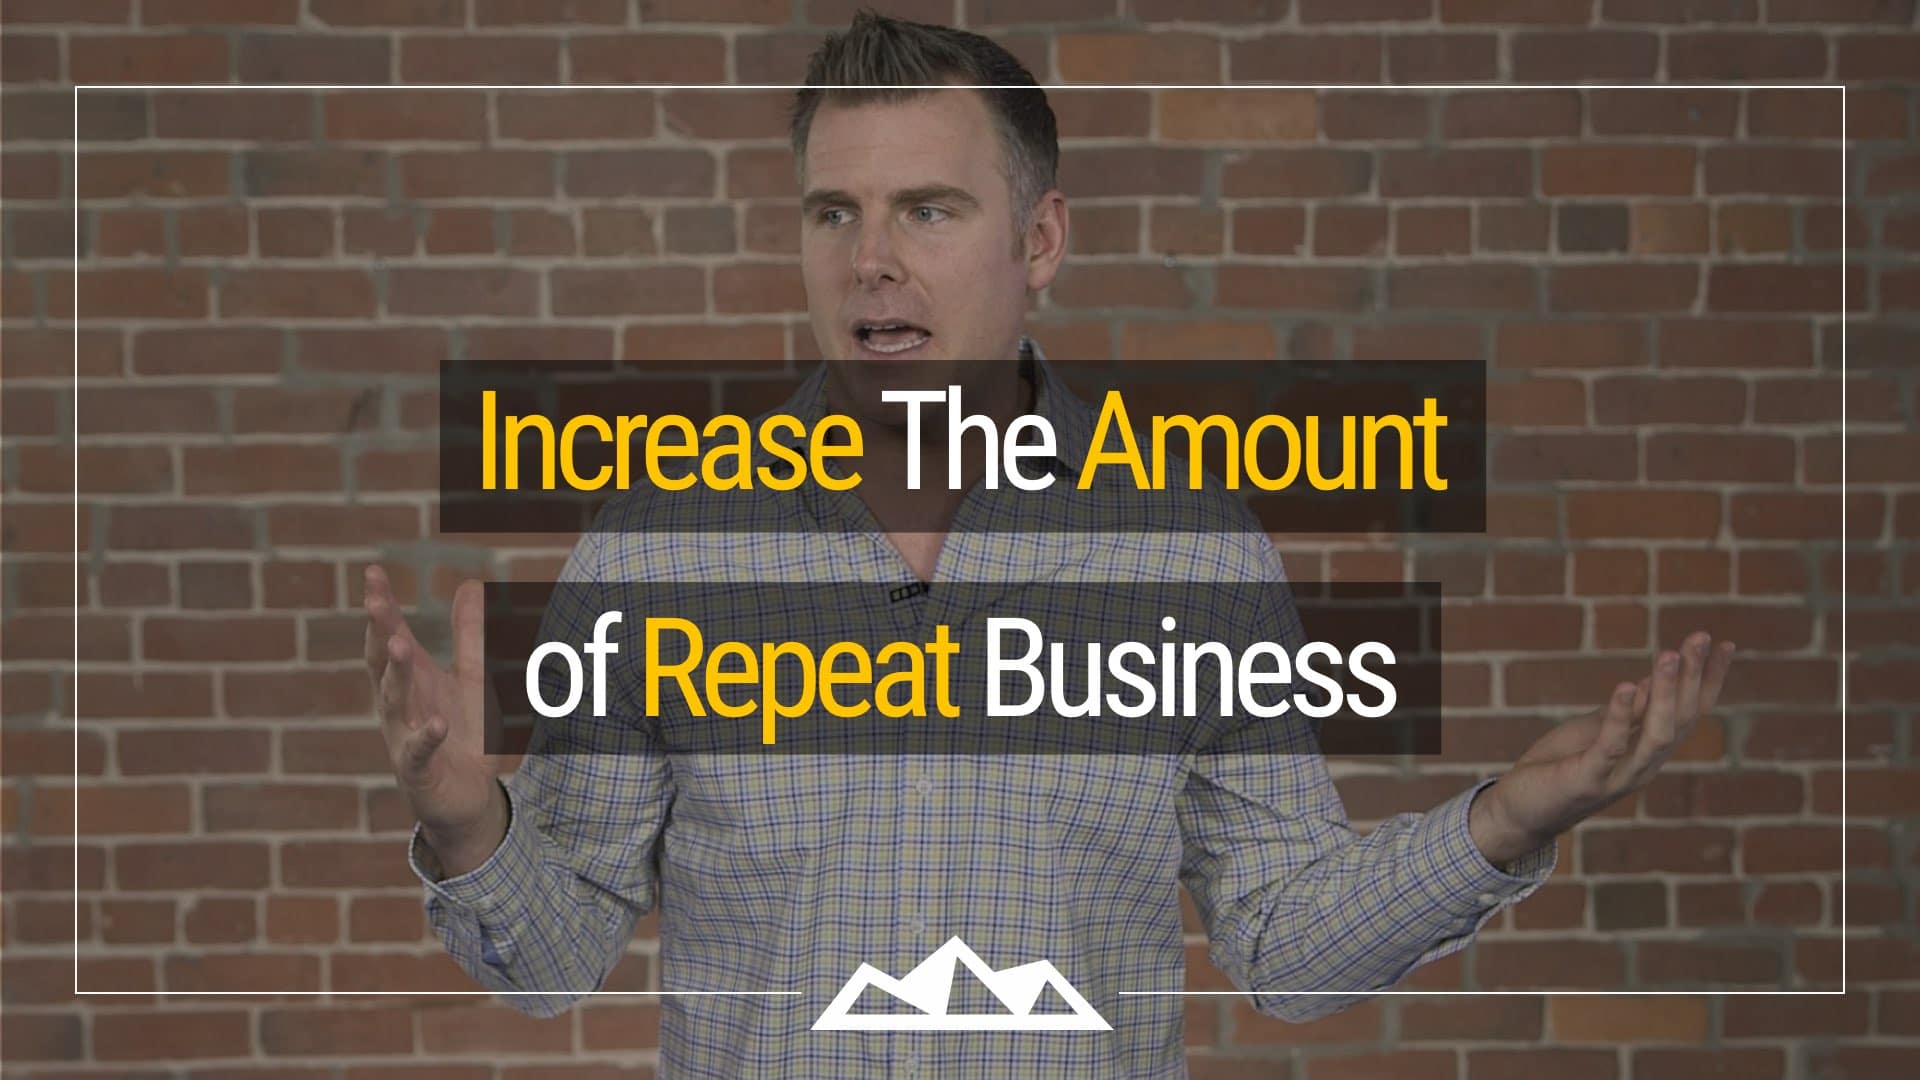 The 6 Secrets Of Repeat Business: How To Make More Sales Without Finding New Customers